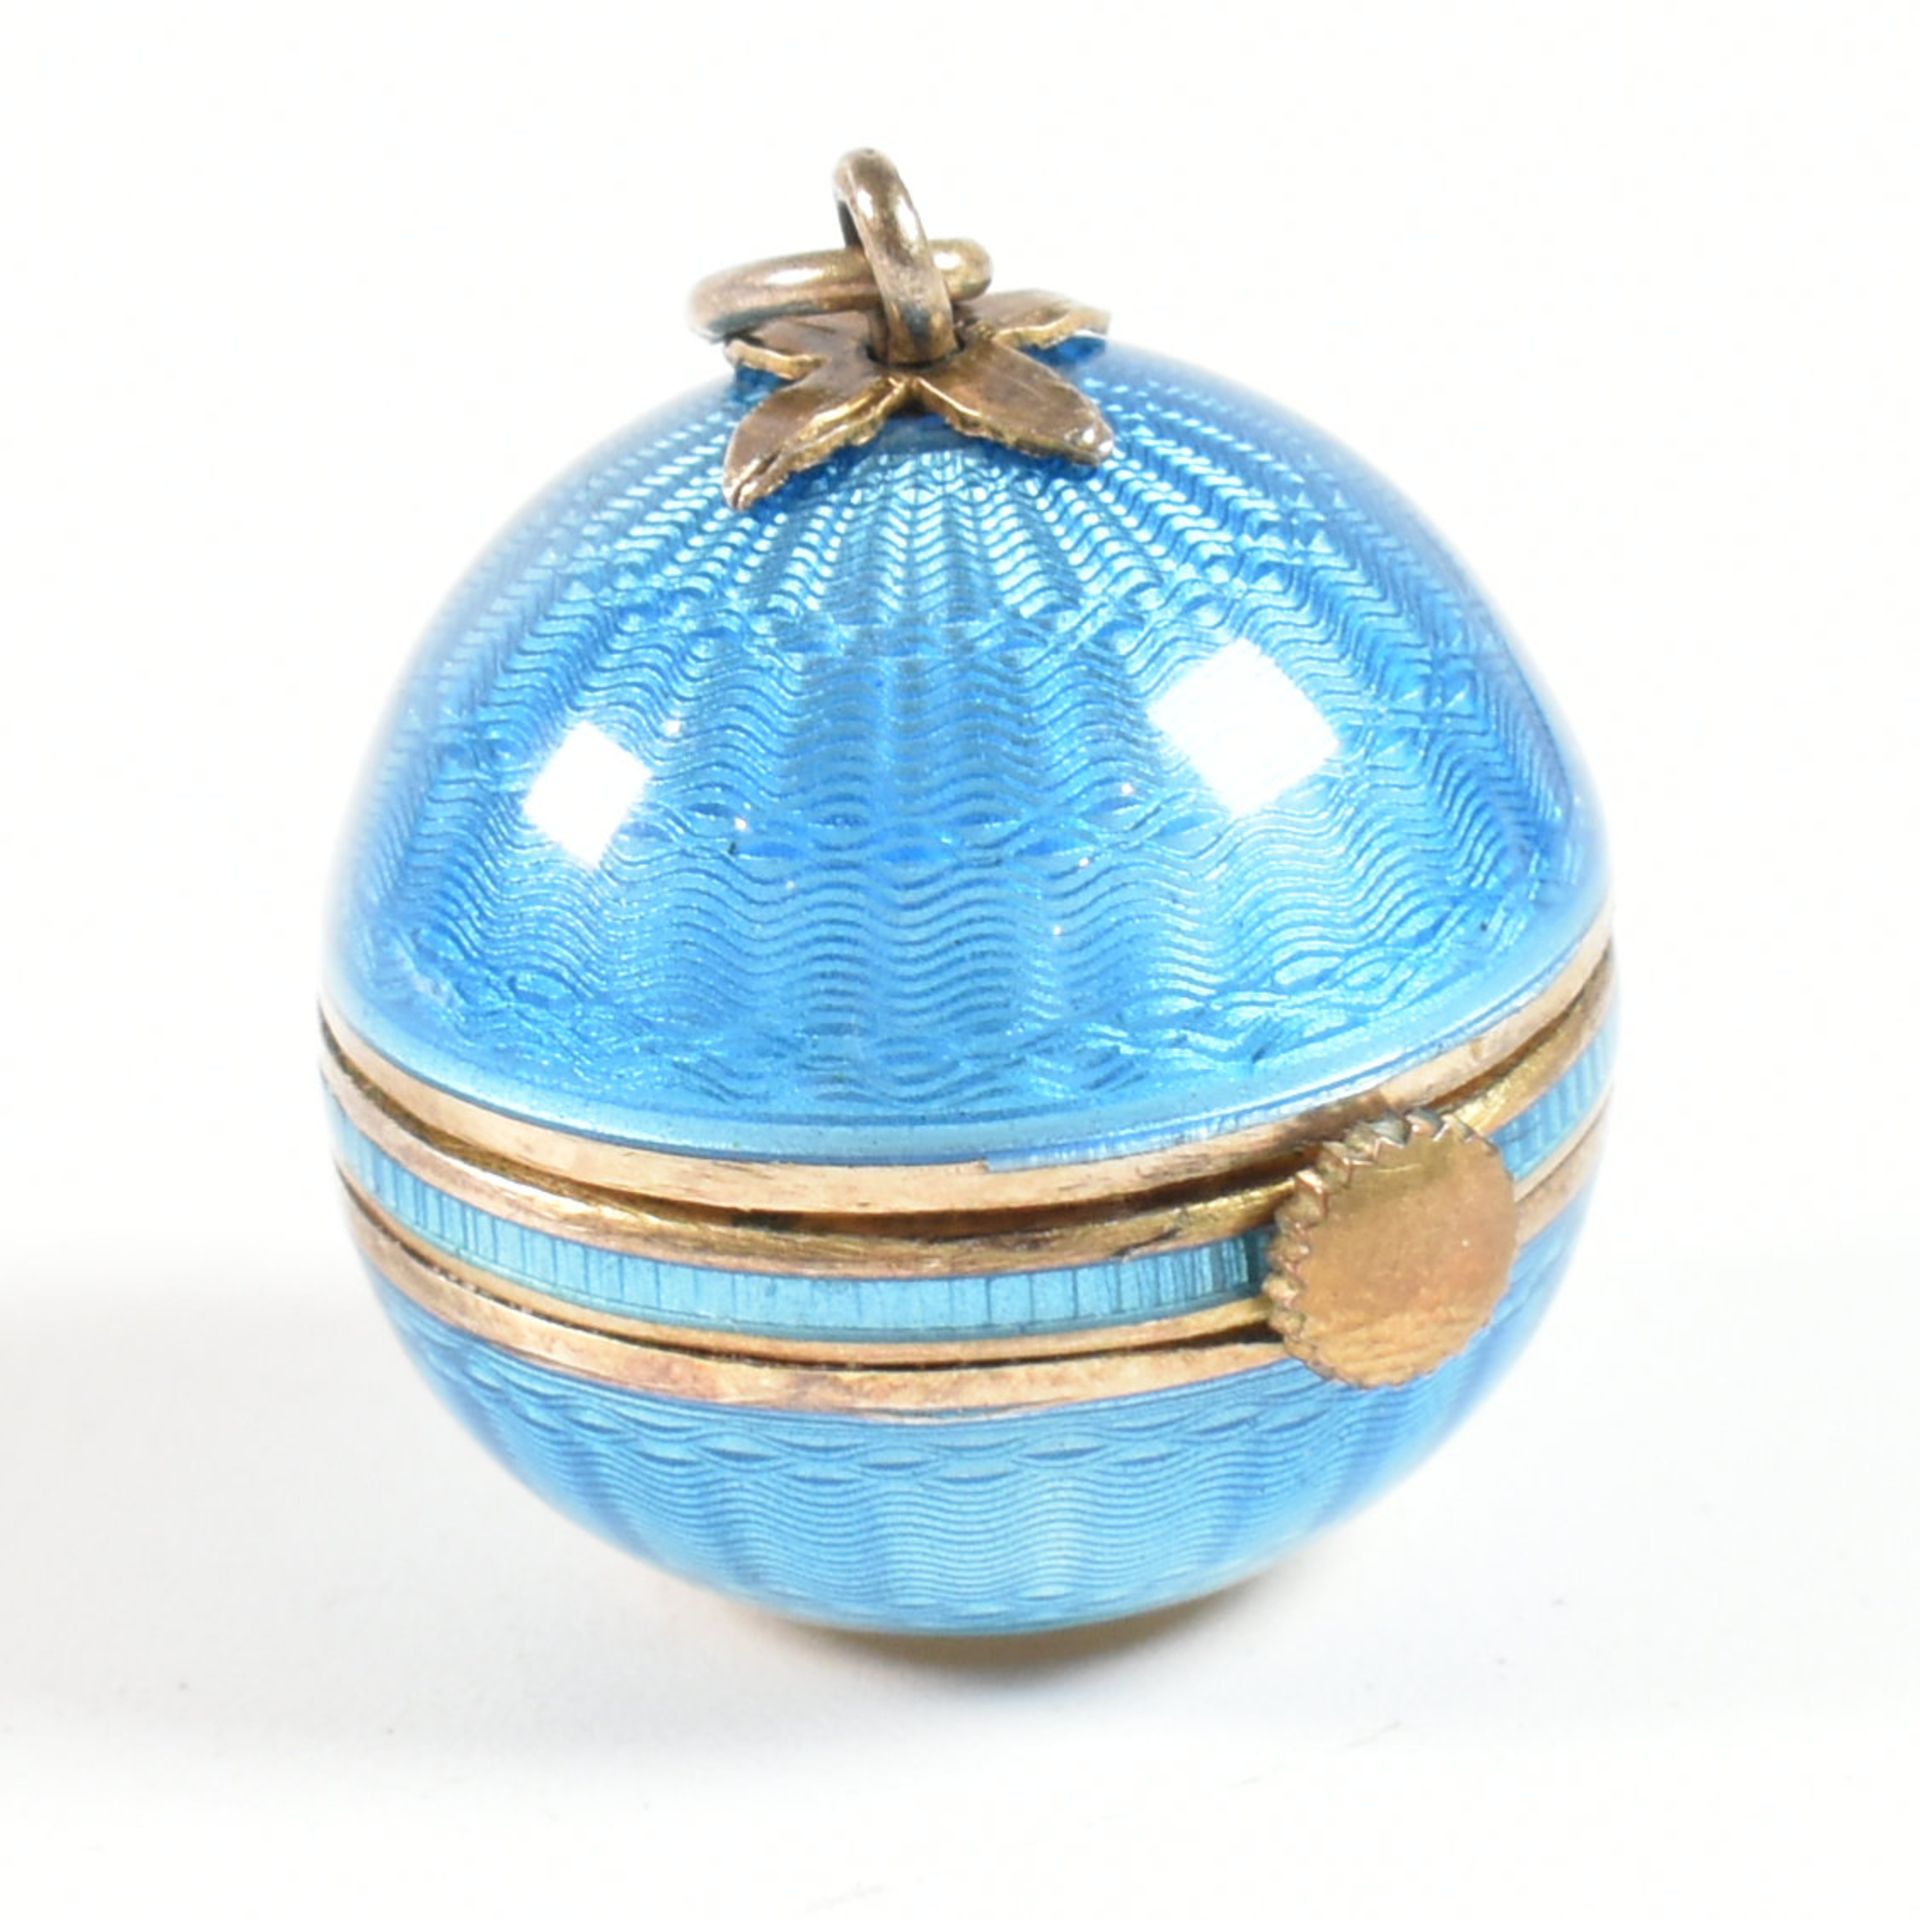 EARLY 20TH CENTURY SWISS SILVER ENAMEL BALL WATCH & CHAIN - Image 10 of 13